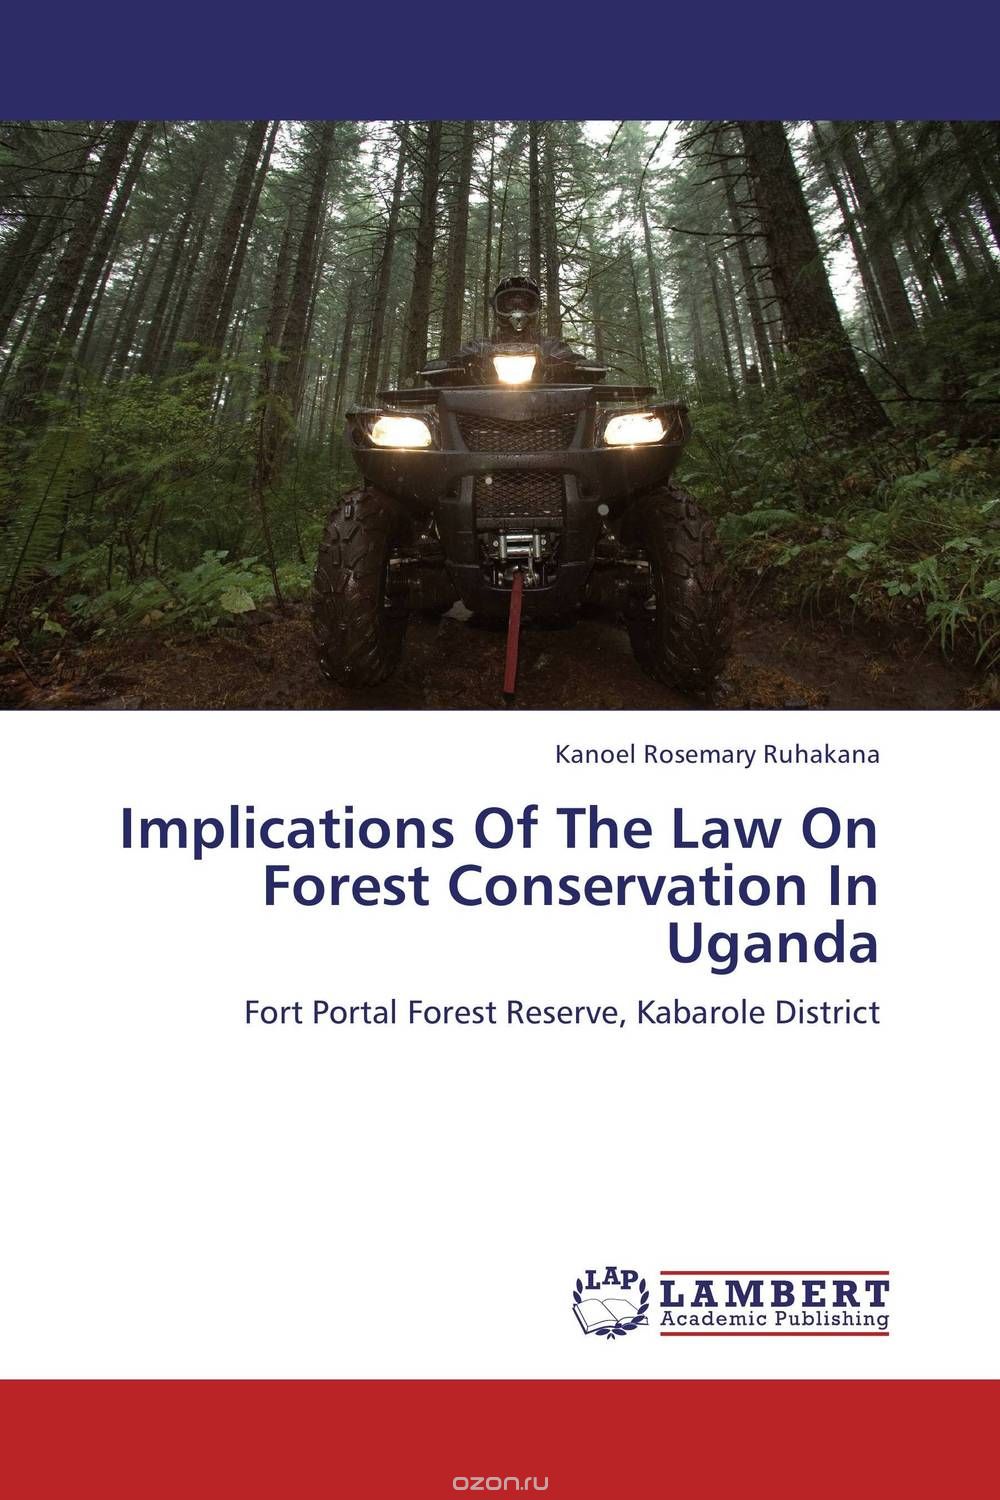 Скачать книгу "Implications Of The Law On Forest Conservation In Uganda"